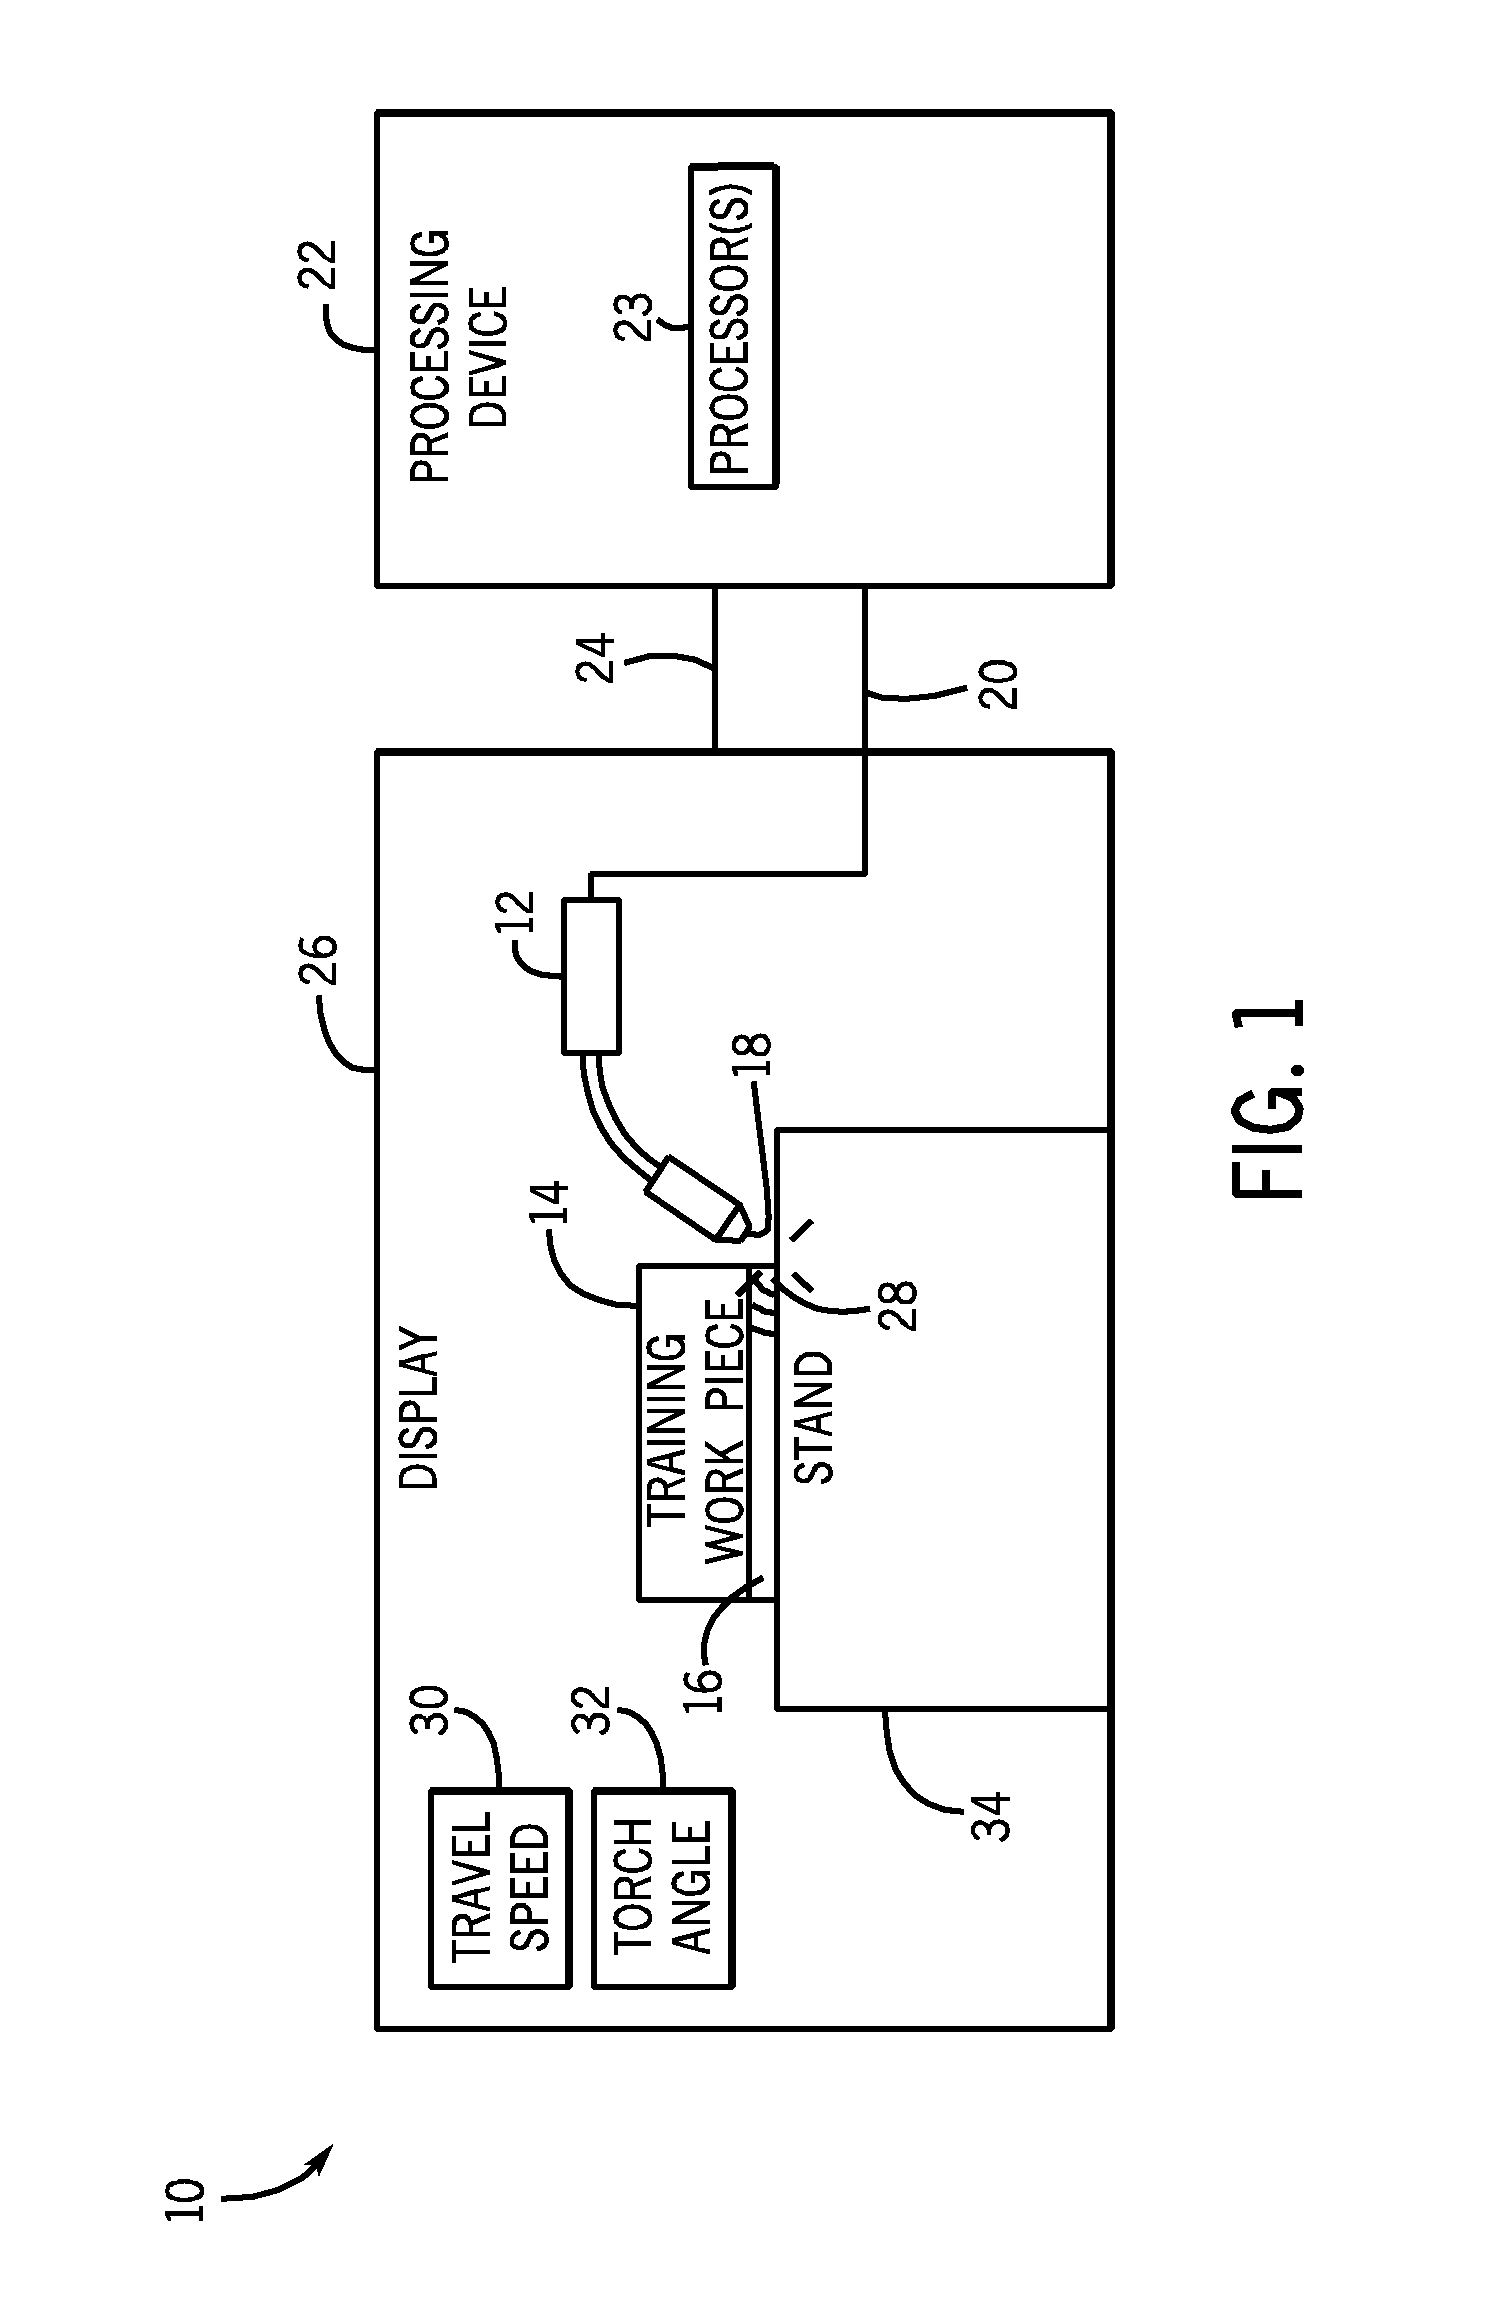 System and device for welding training